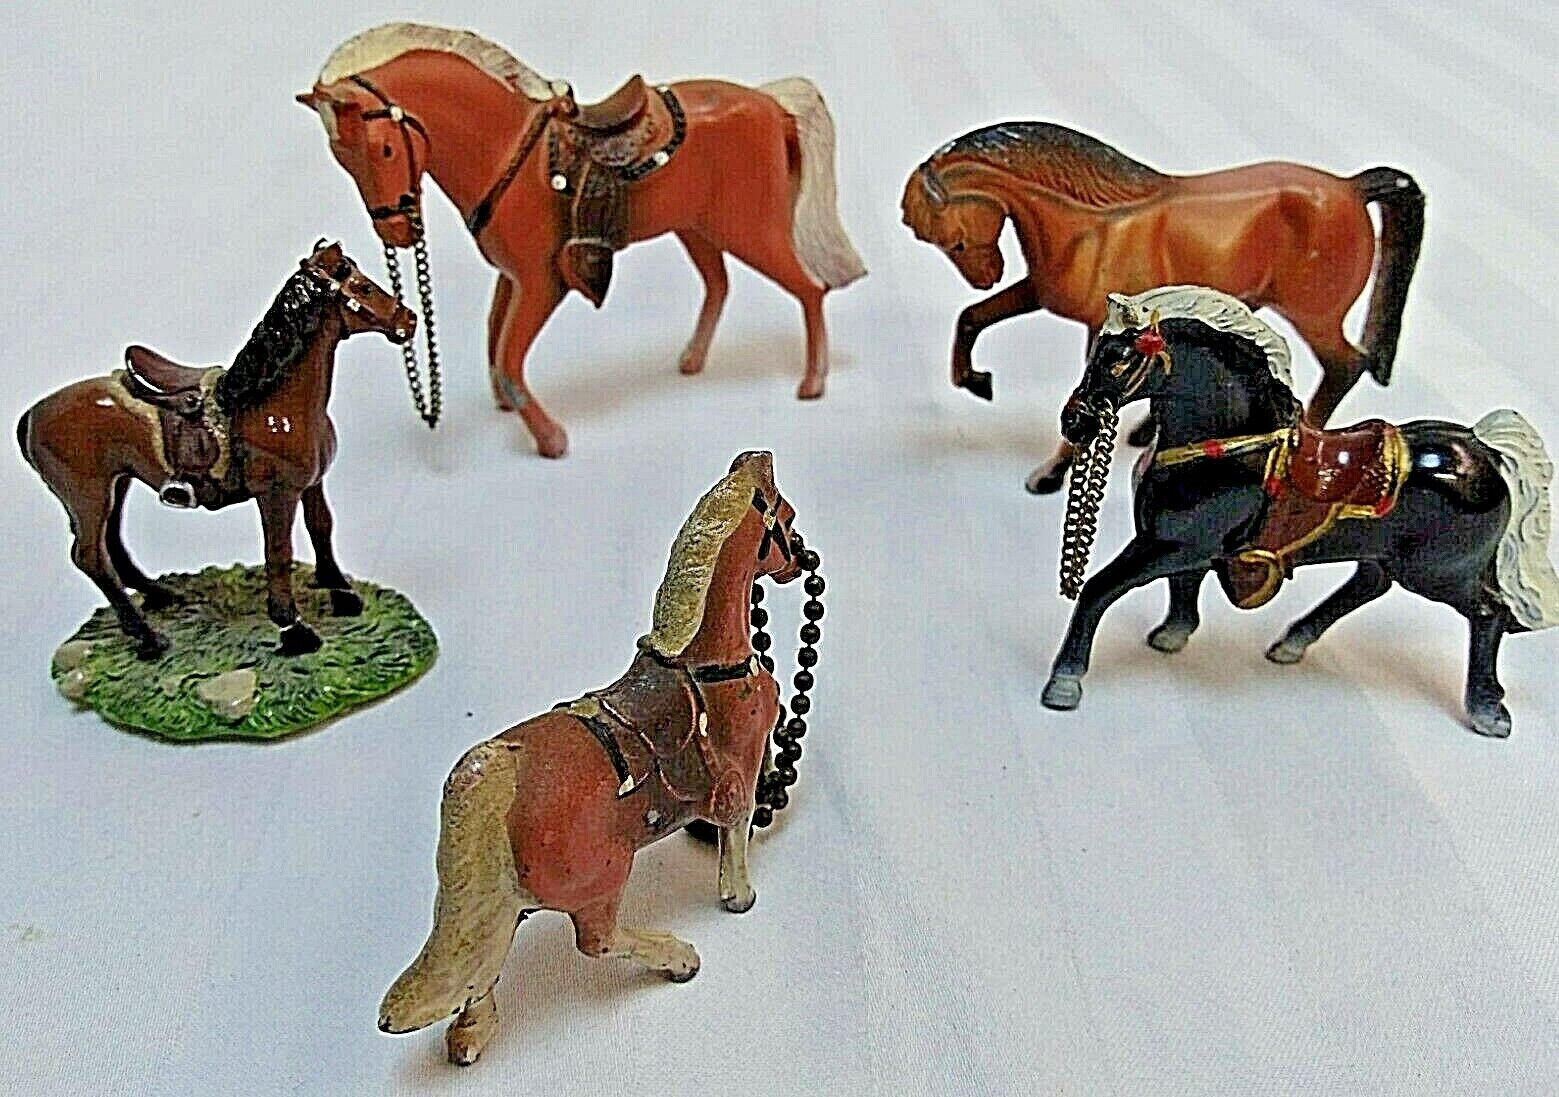 Assorted Cast Metal Horse Figurines (5 pc) 3" tall No Brand